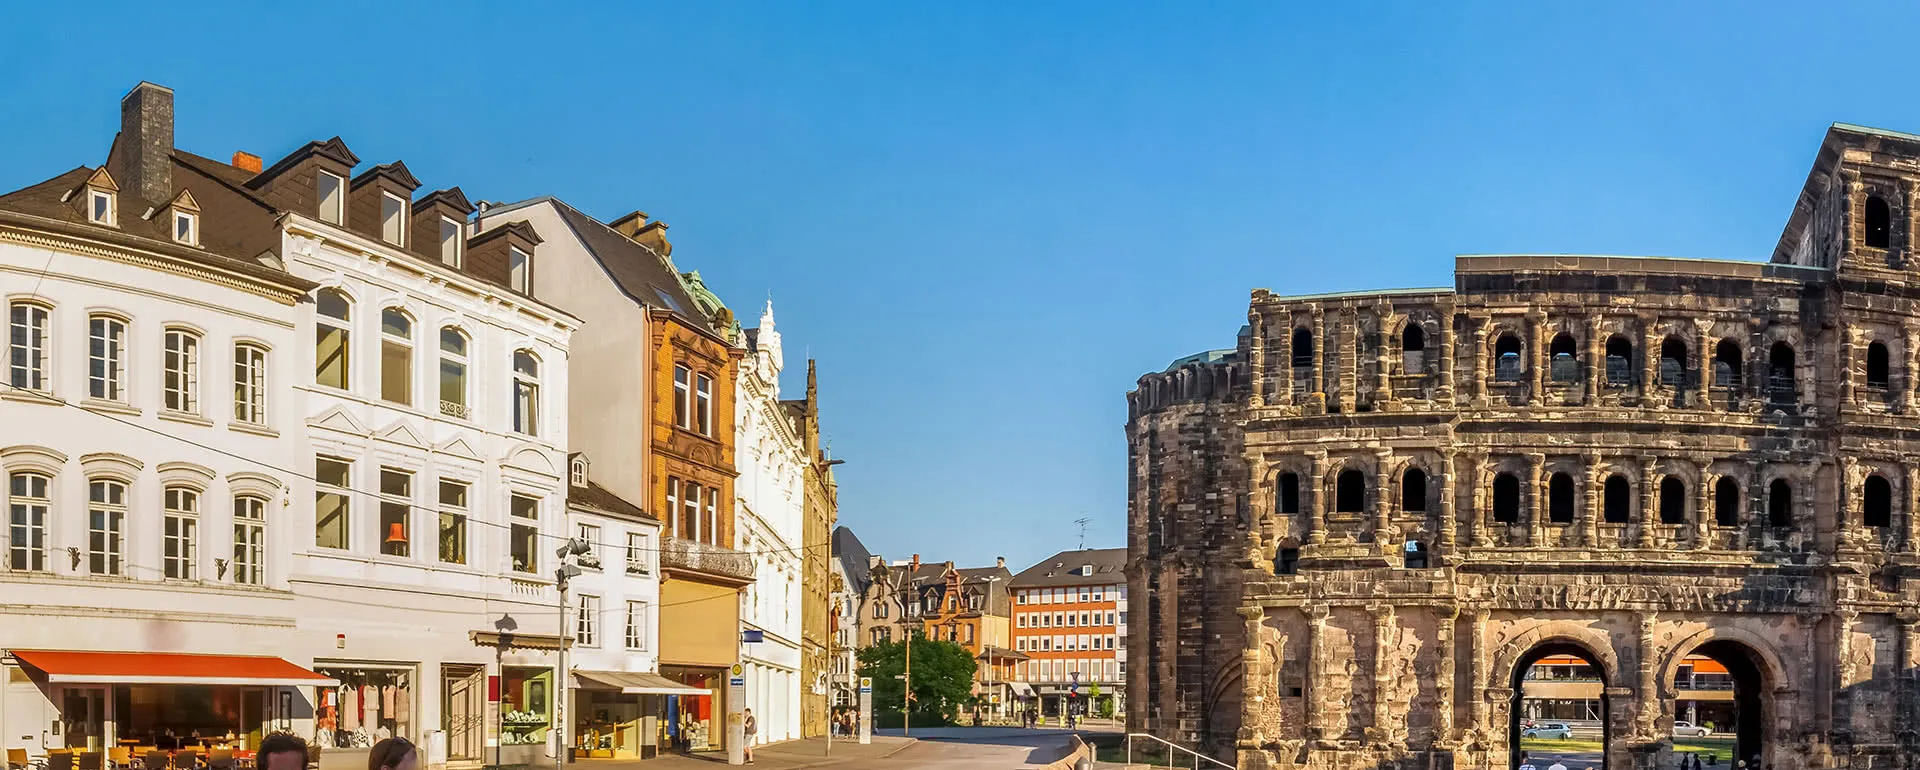 Trier - the destination with youth hostels